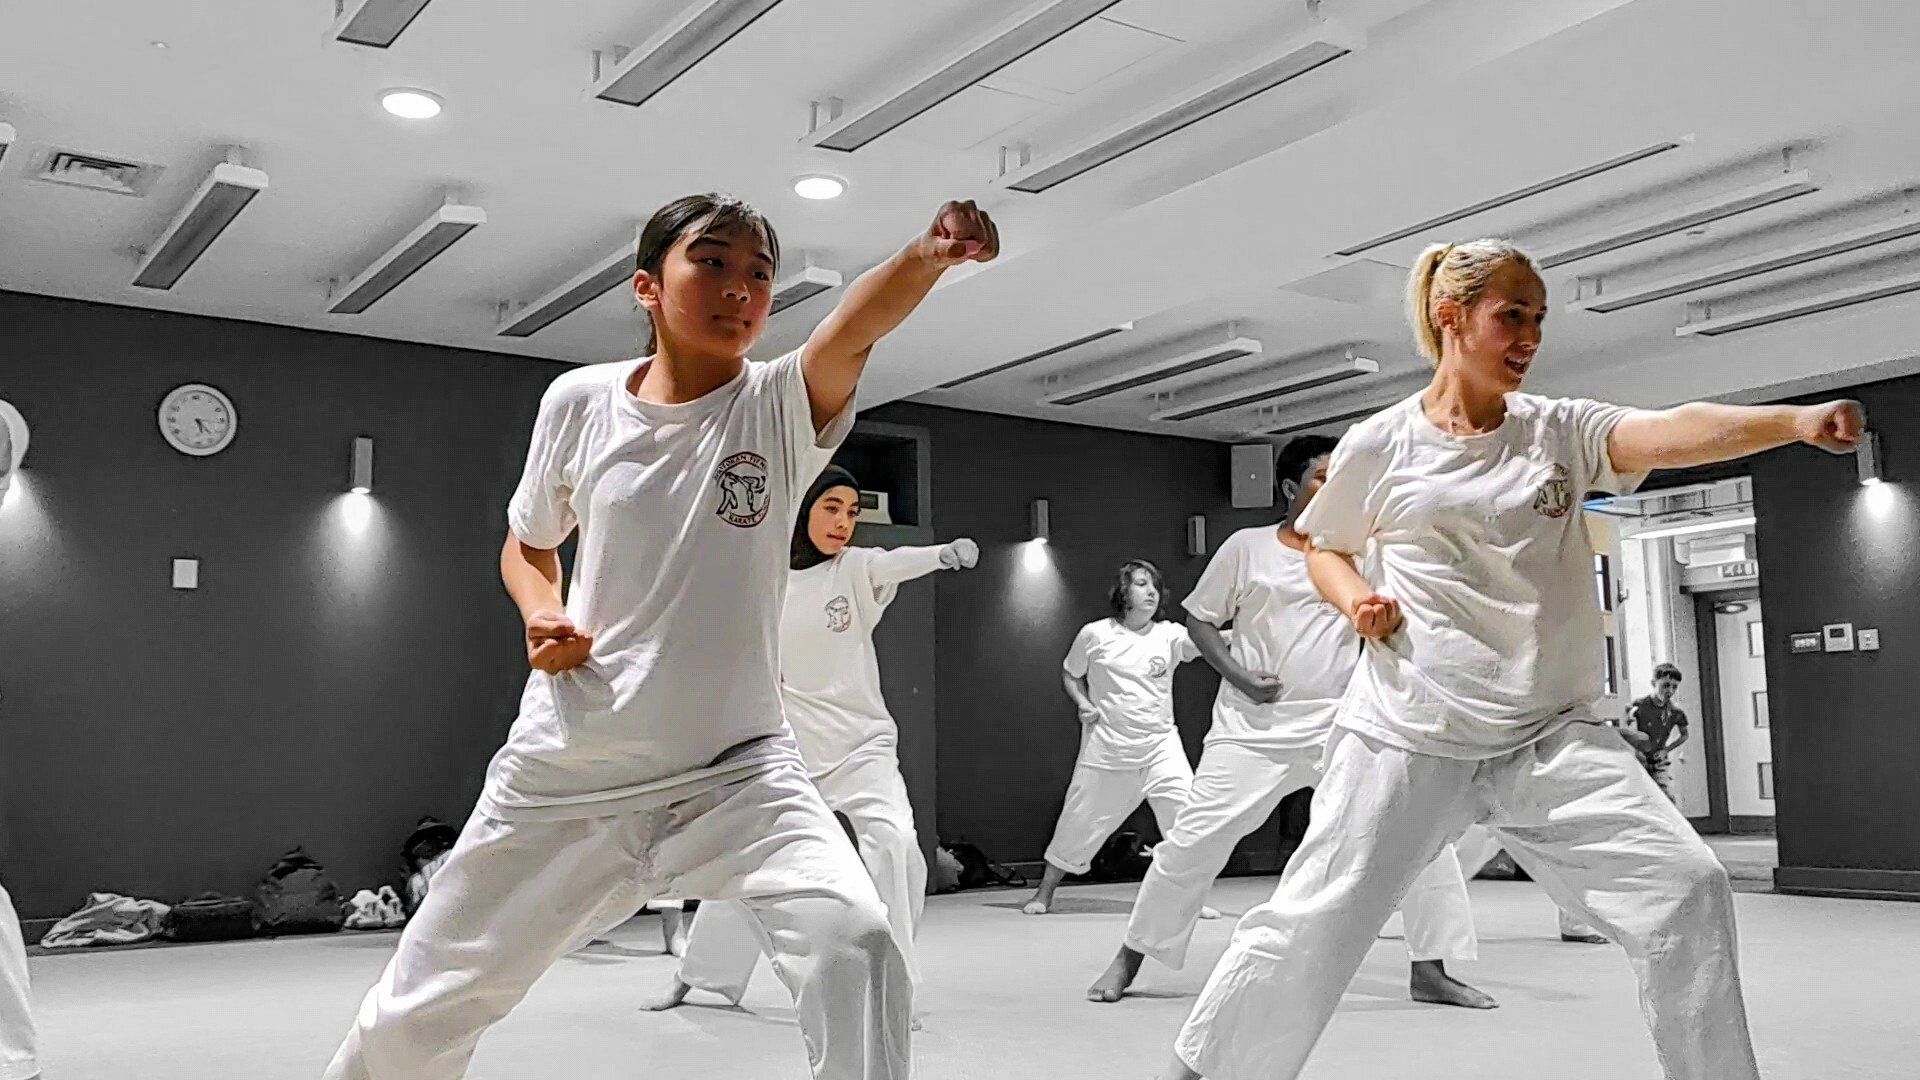 Karate classes and Self-Defence at Porchester Centre. In W2, London.